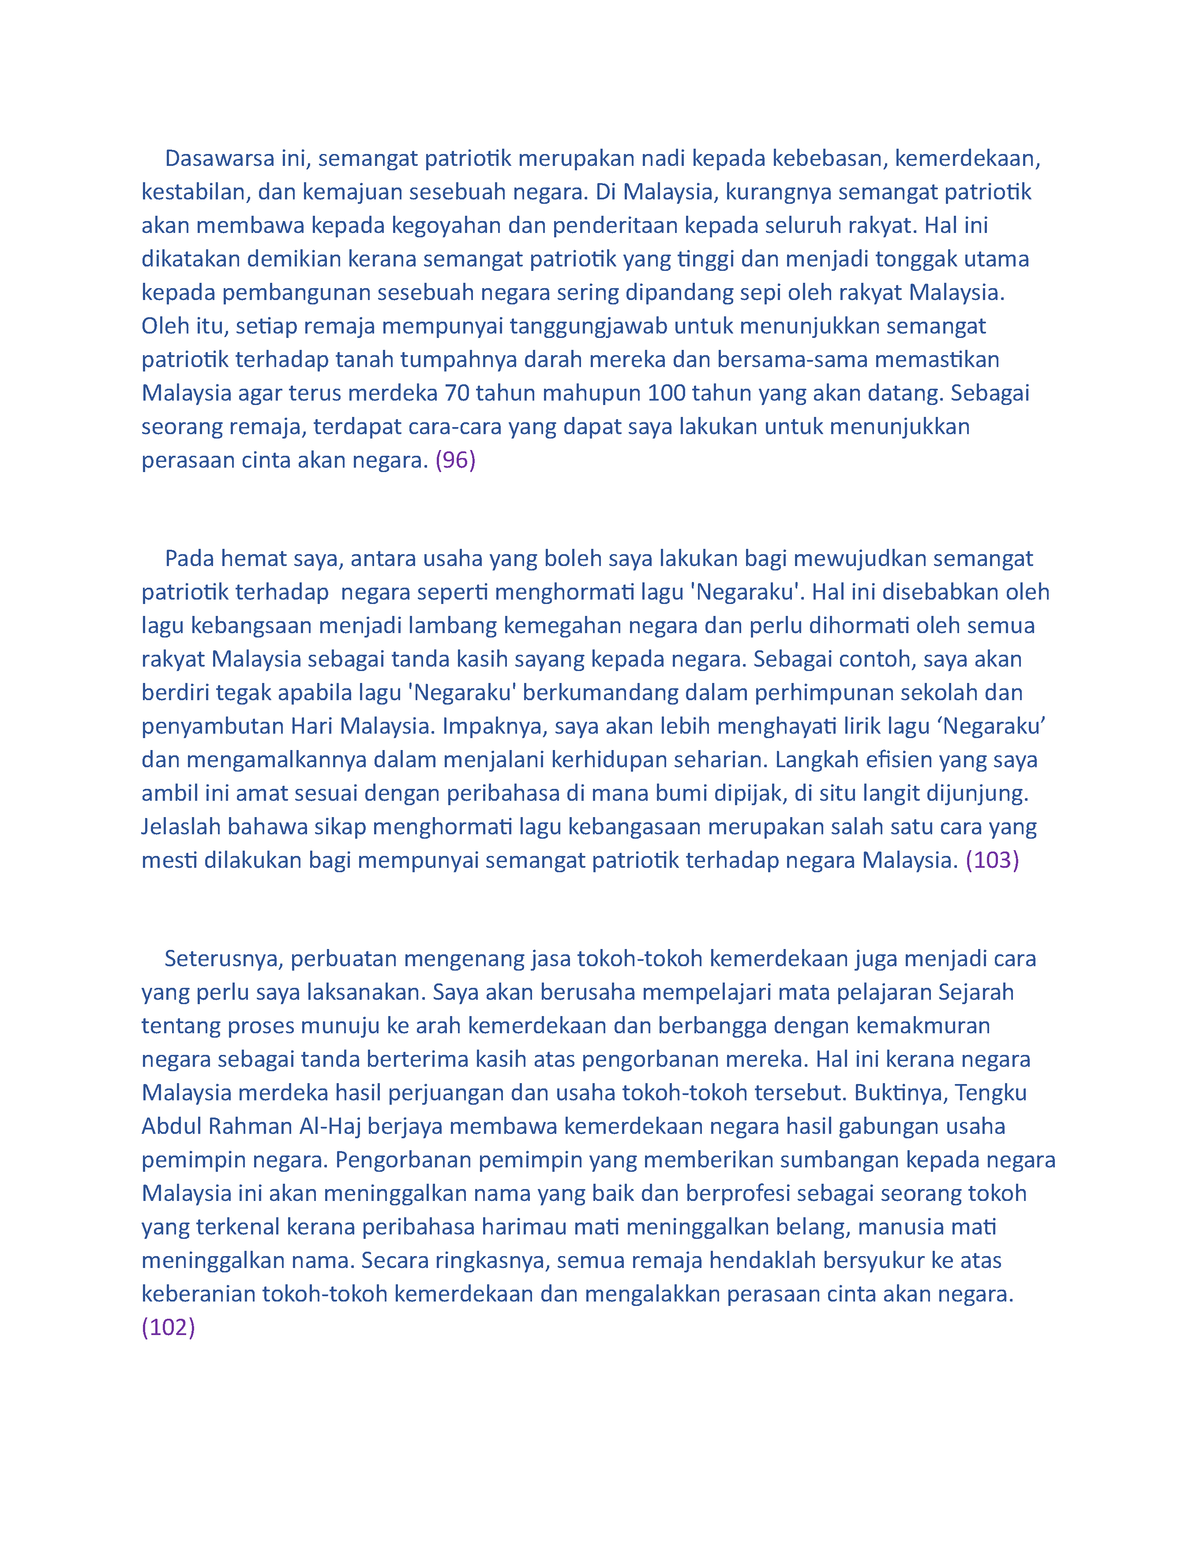 essay meaning in malay language